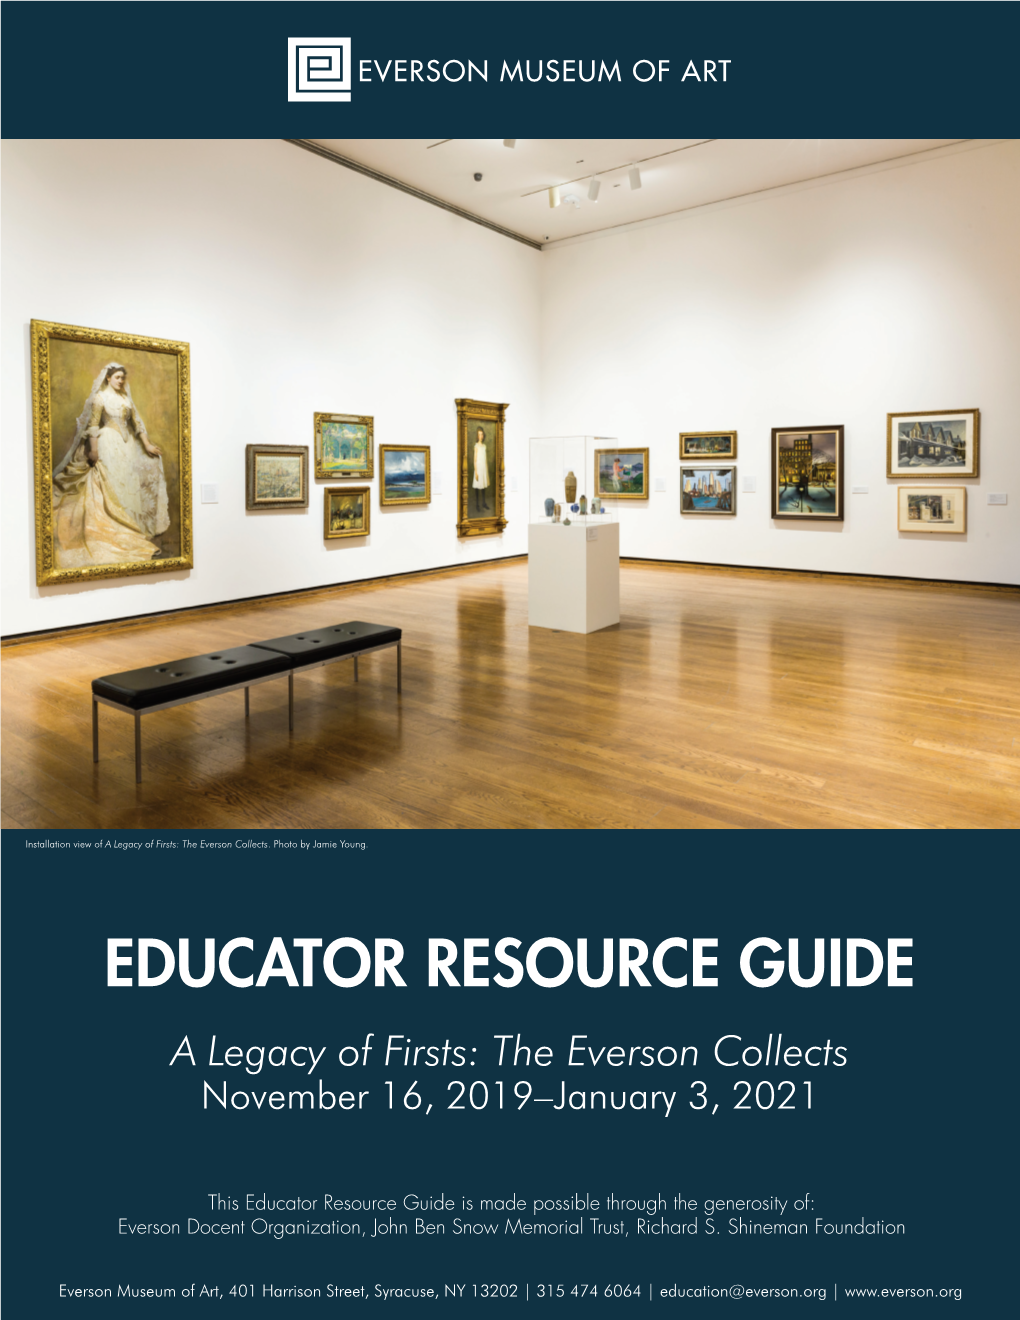 Educator Resource Guide Is Made Possible Through the Generosity Of: Everson Docent Organization, John Ben Snow Memorial Trust, Richard S